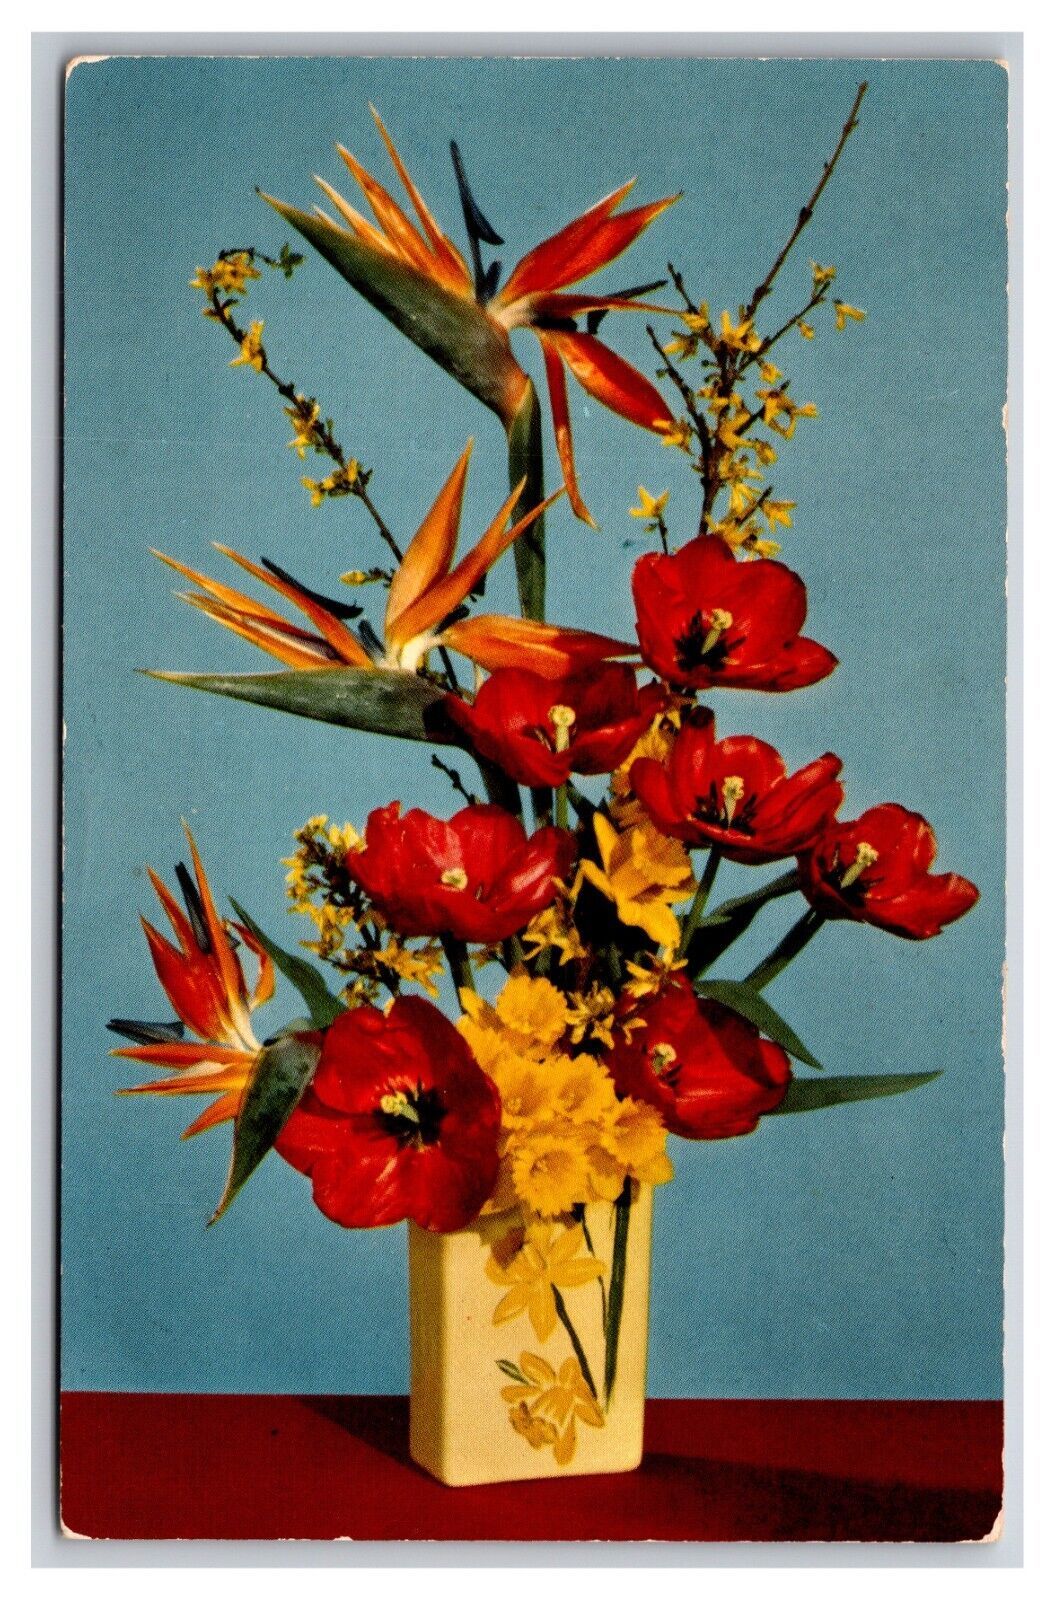 Primary image for Tulips and Bird of Paradise Flowers in Vase UNP Chrome Postcard Z4